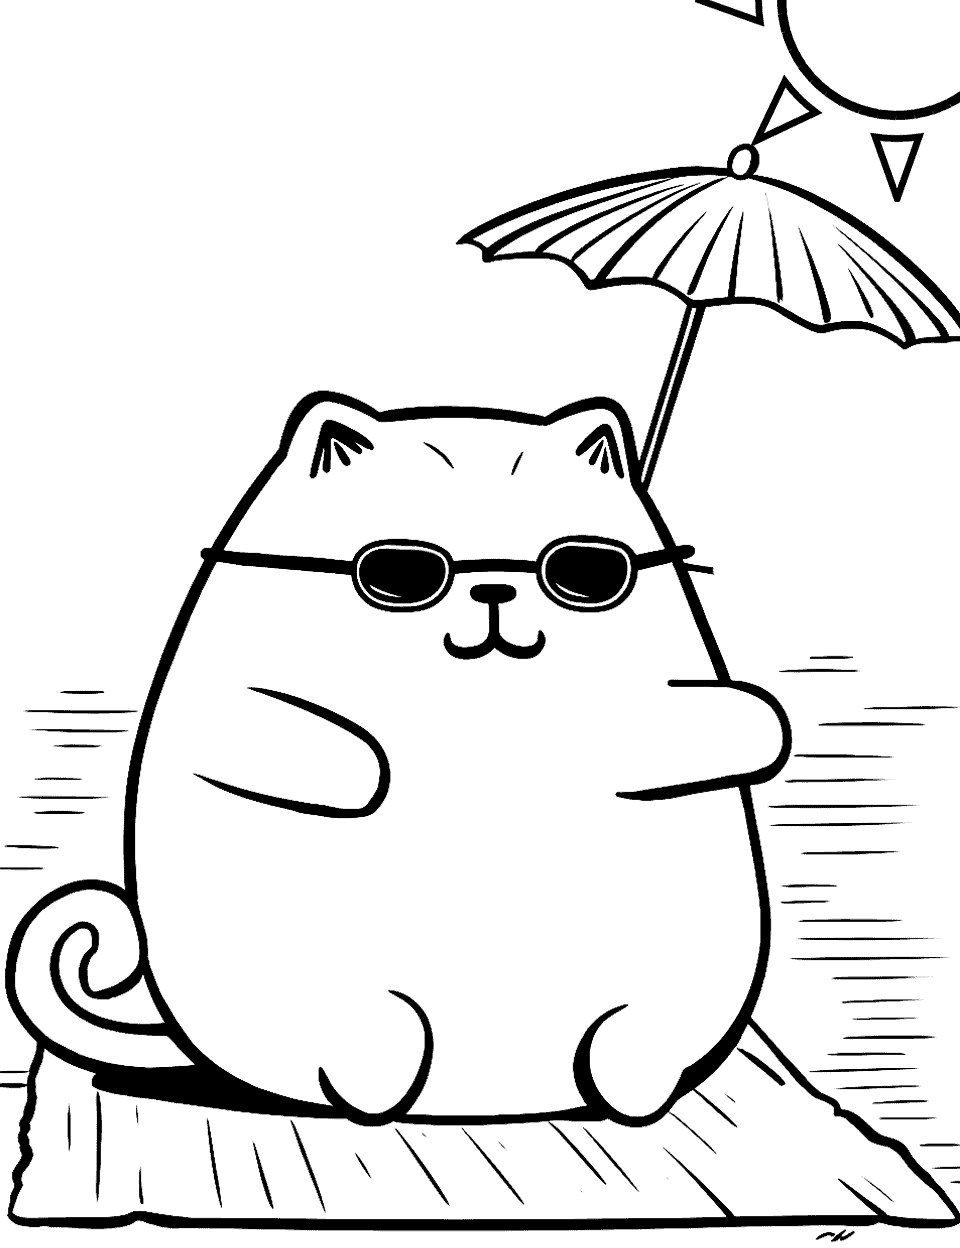 Summer Vibes Coloring Page - Pusheen sunbathing with sunglasses on a beach towel.